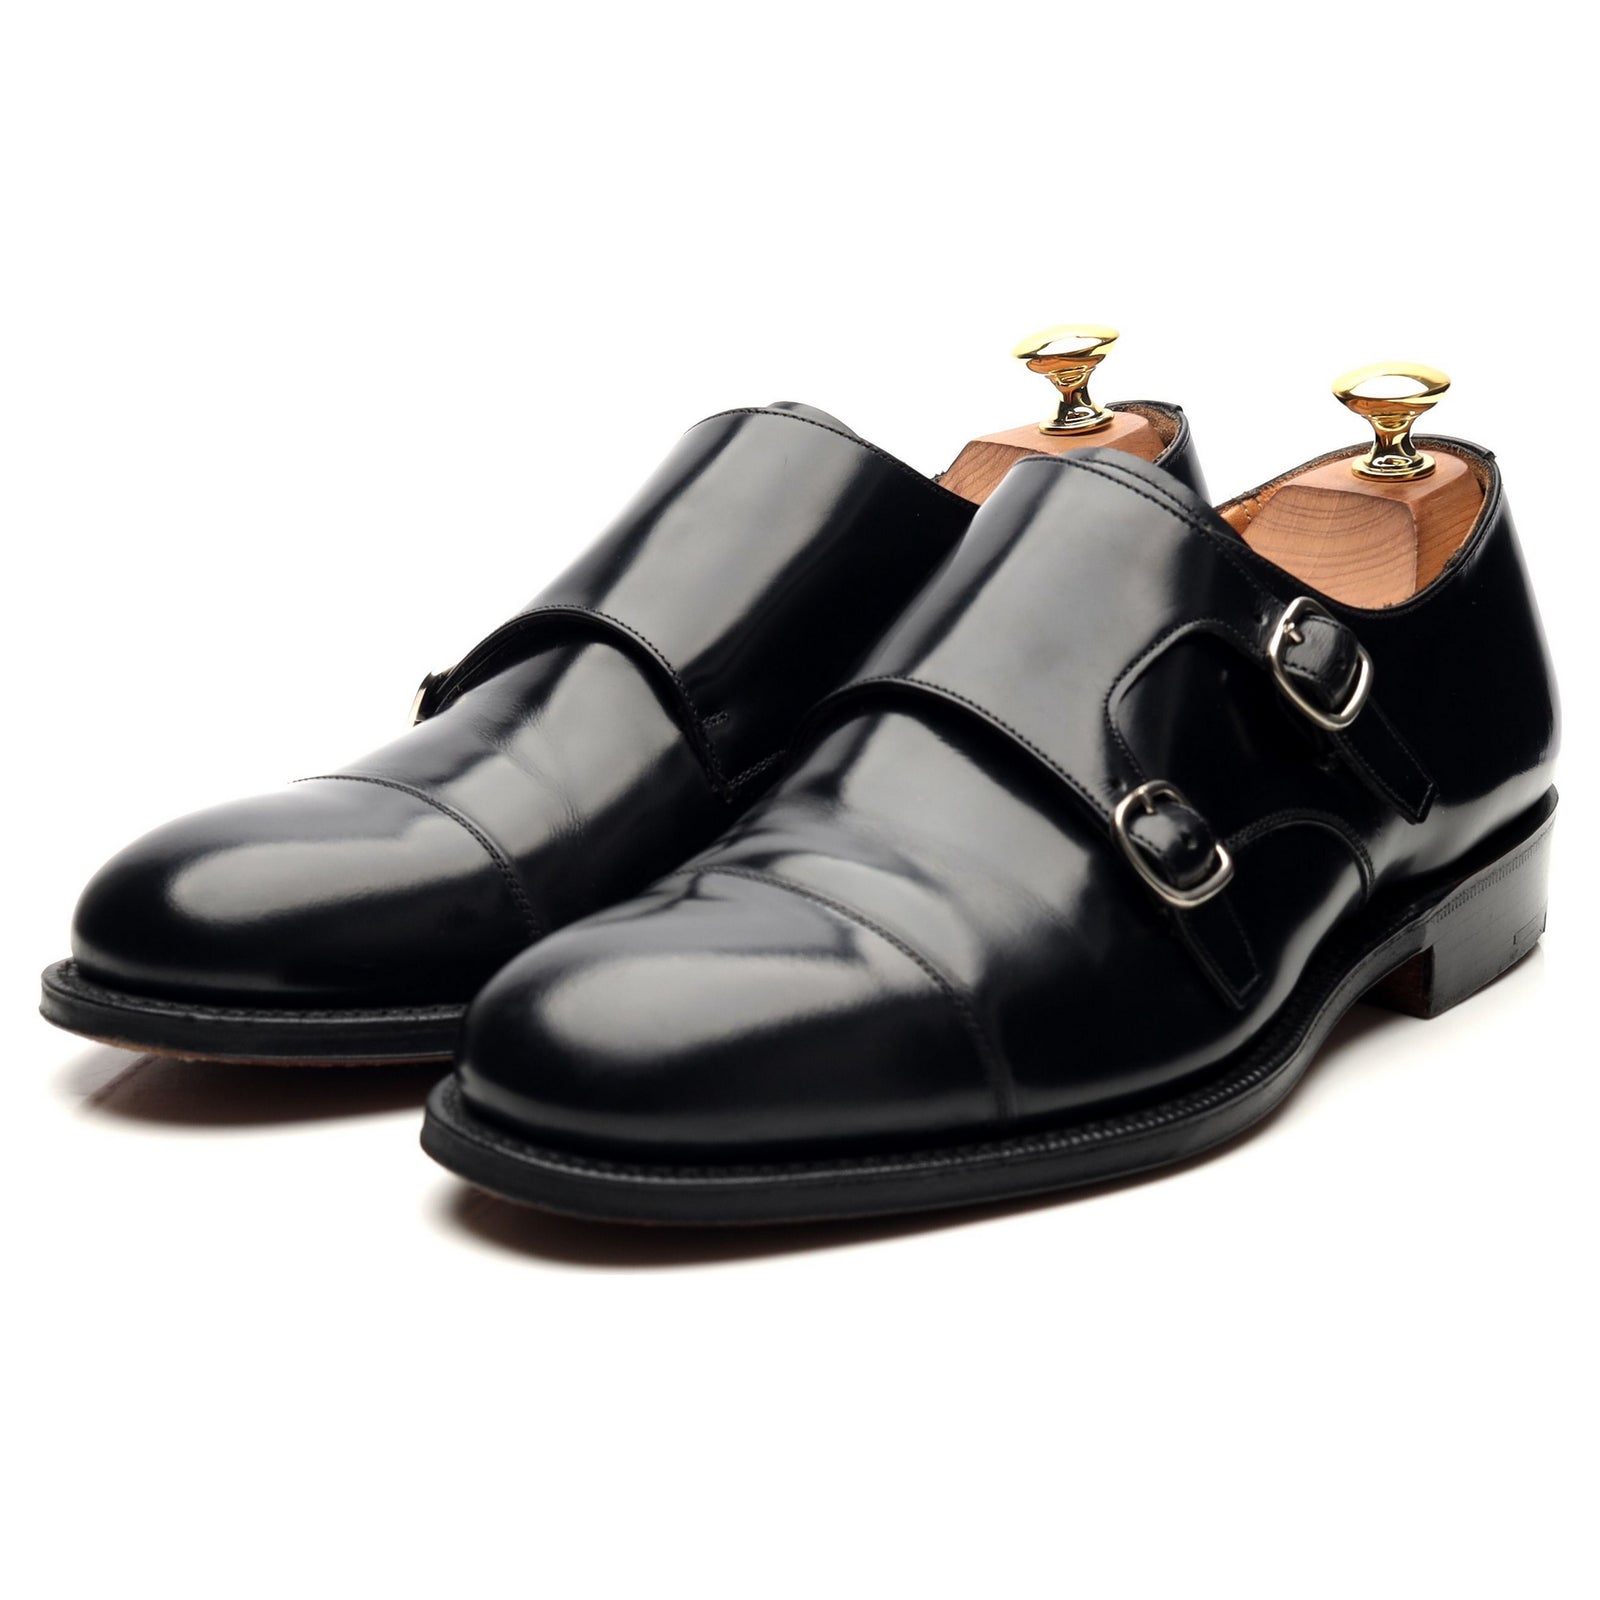 Monk Strap Shoes - Abbot's Shoes Tagged 